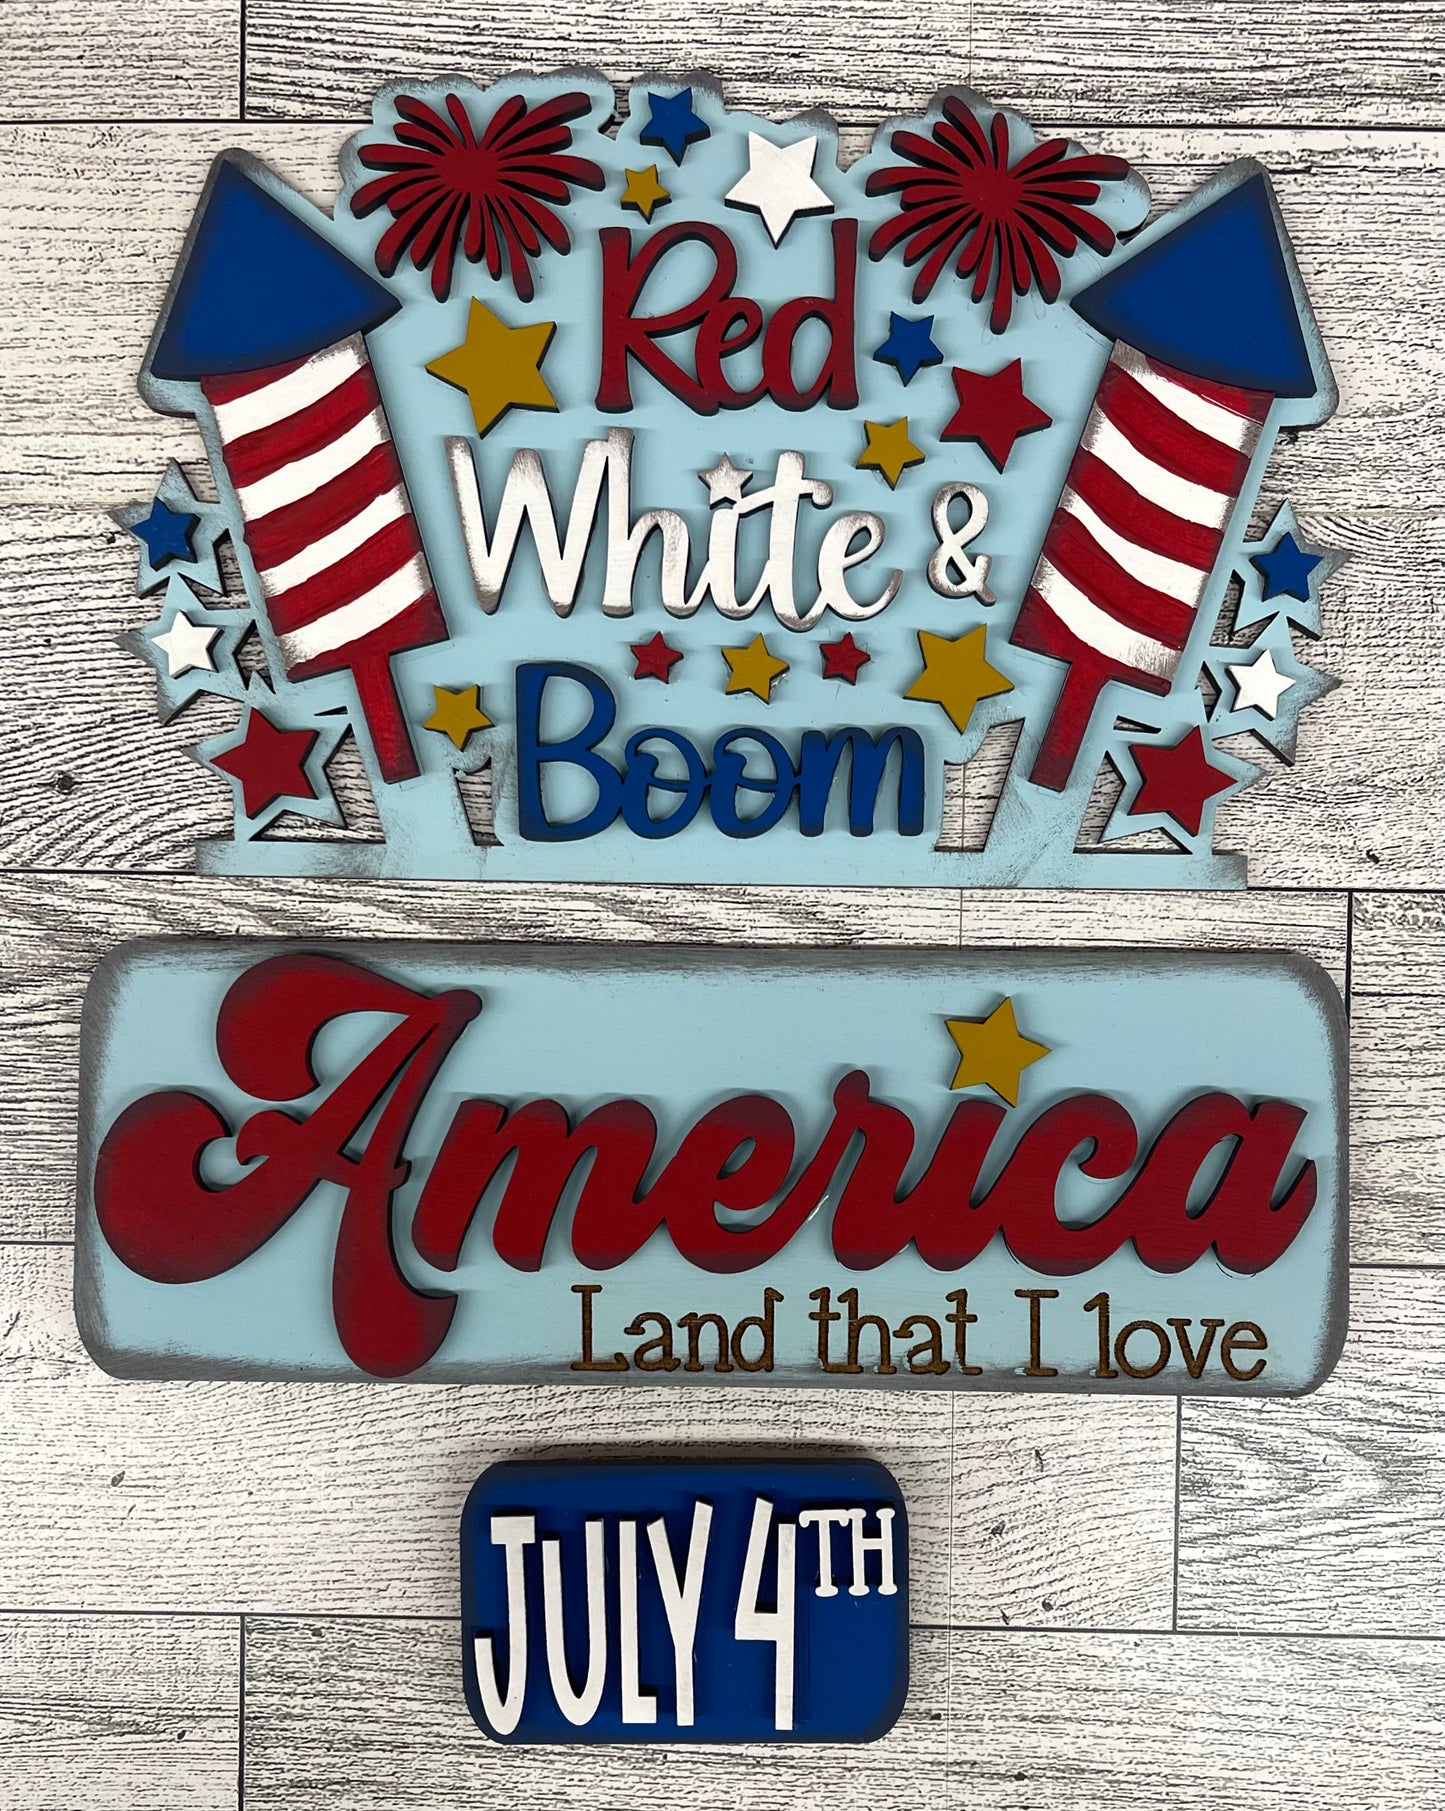 Red White & Boom Patriotic Truck Insert cutouts - unpainted wooden cutouts, ready for you to paint